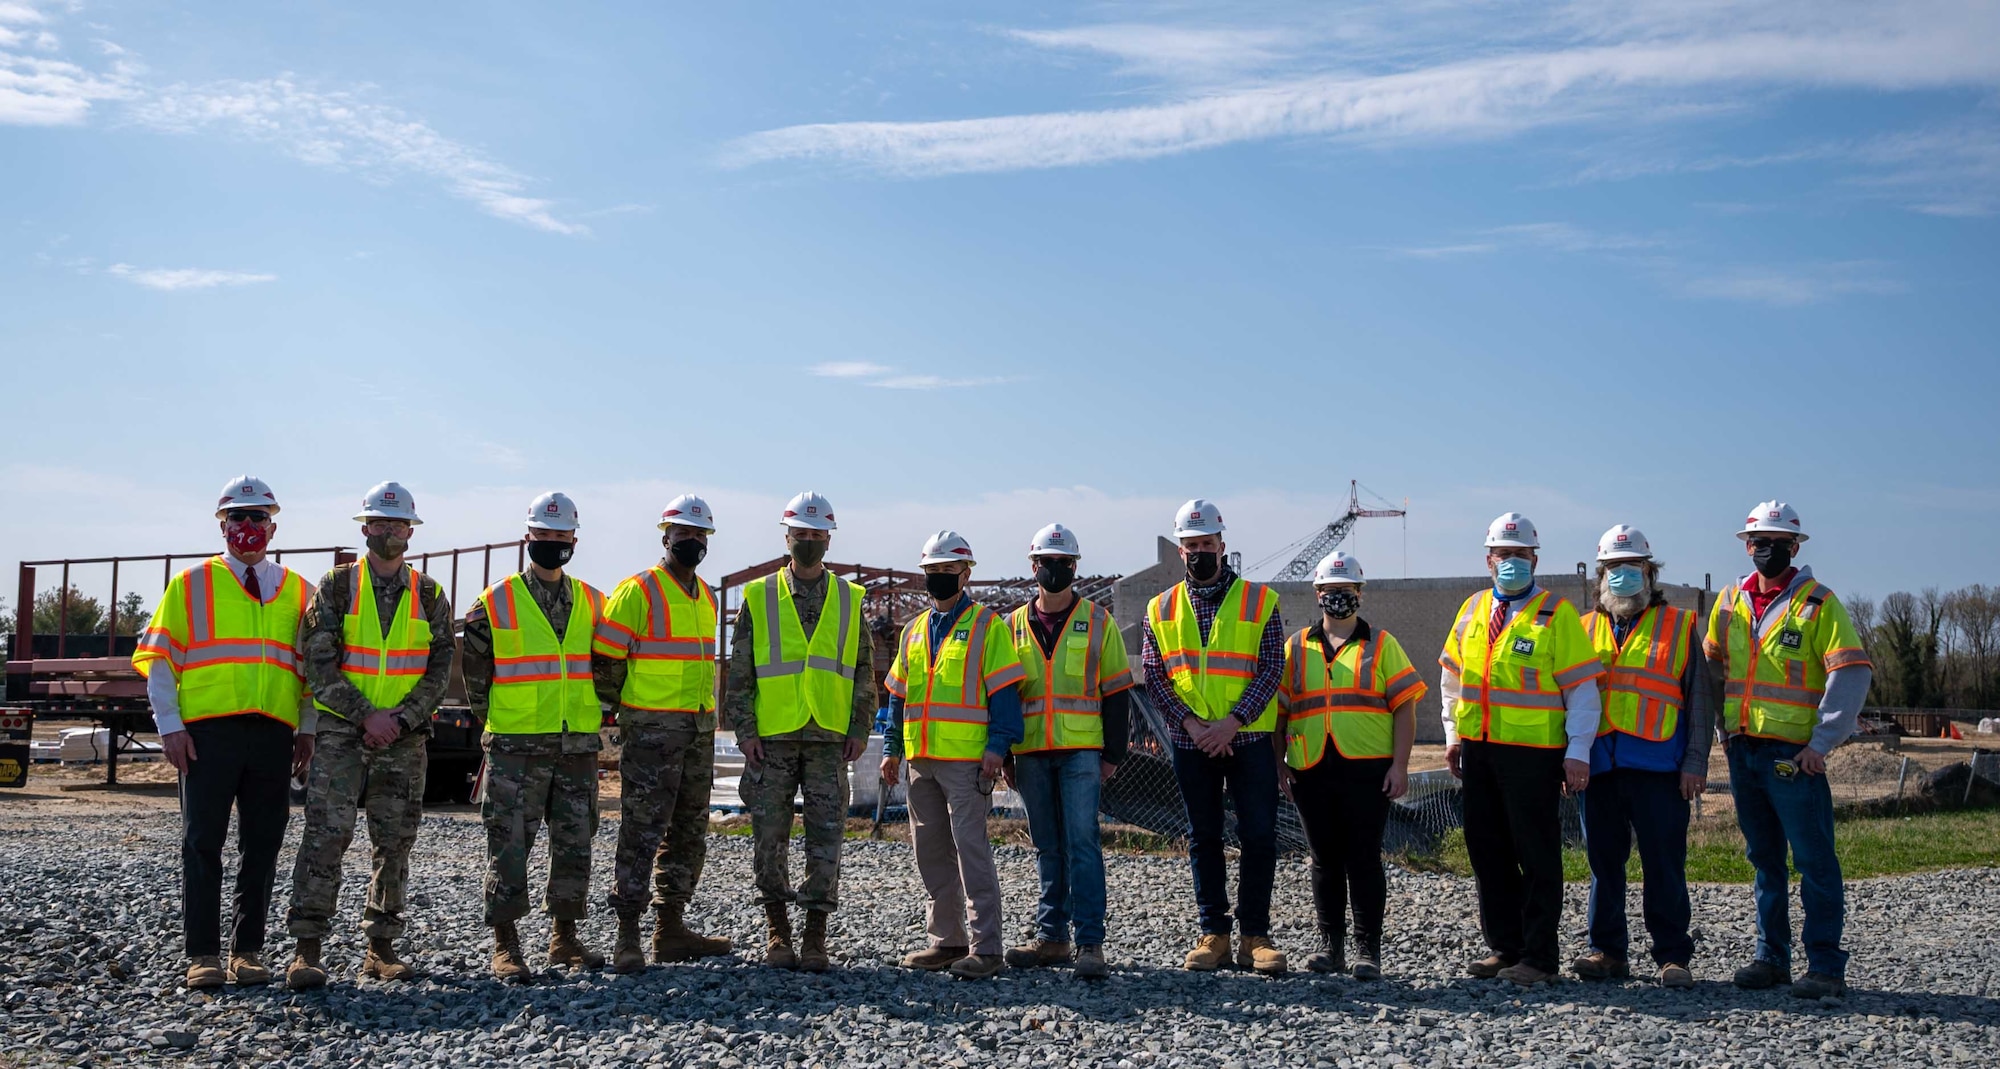 U.S. Army Corps of Engineers Dover Air Force Base military construction team members pose for a photo in front of the school construction site with U.S. Army Lt. Gen. Scott A. Spellmon, 55th Chief of Engineers, U.S. Army Corps of Engineers commanding general, on Dover AFB, Delaware, April 7, 2021. During a base visit, Spellmon toured facilities under construction management by the Corps. The $48 million school in base housing will replace the current Welch Elementary and Dover AFB Middle Schools. (U.S. Air Force photo by Airman 1st Class Faith Schaefer)